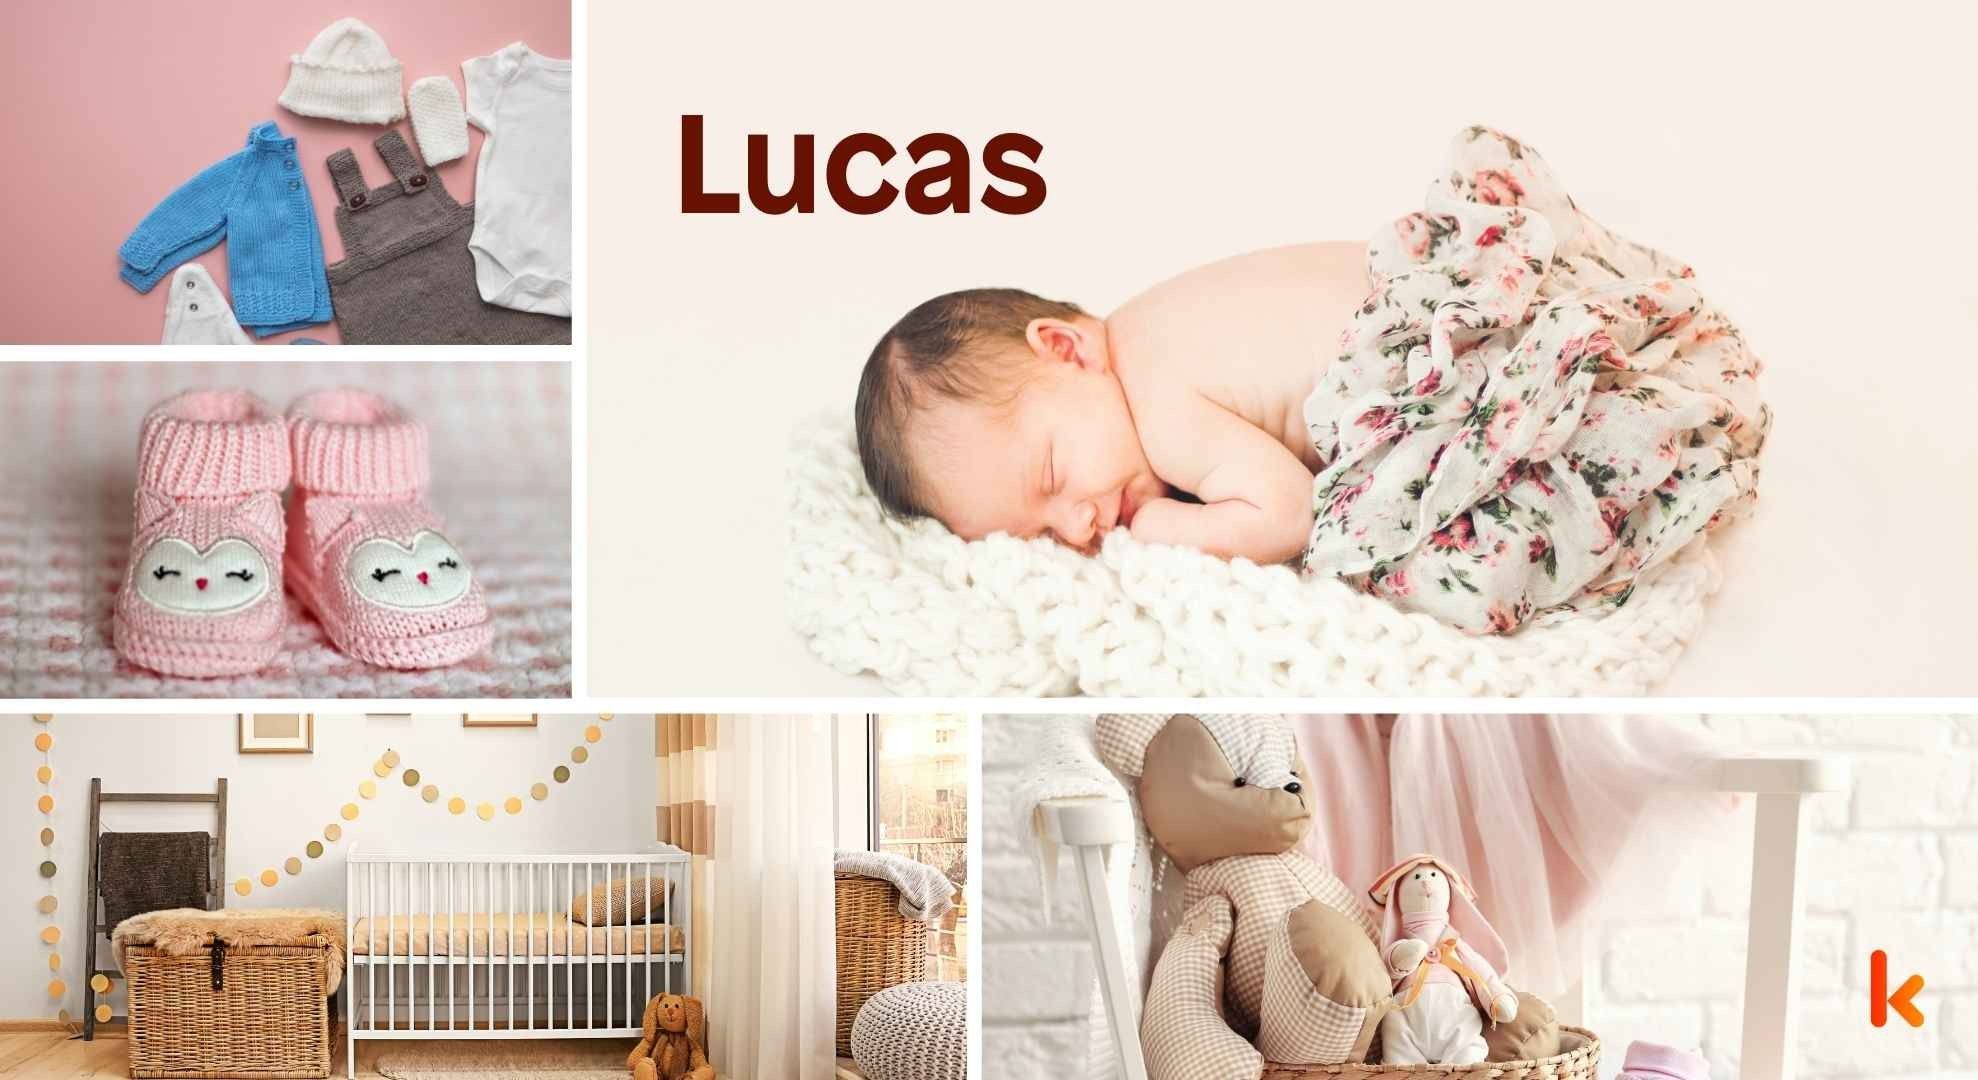 Meaning of the name Lucas